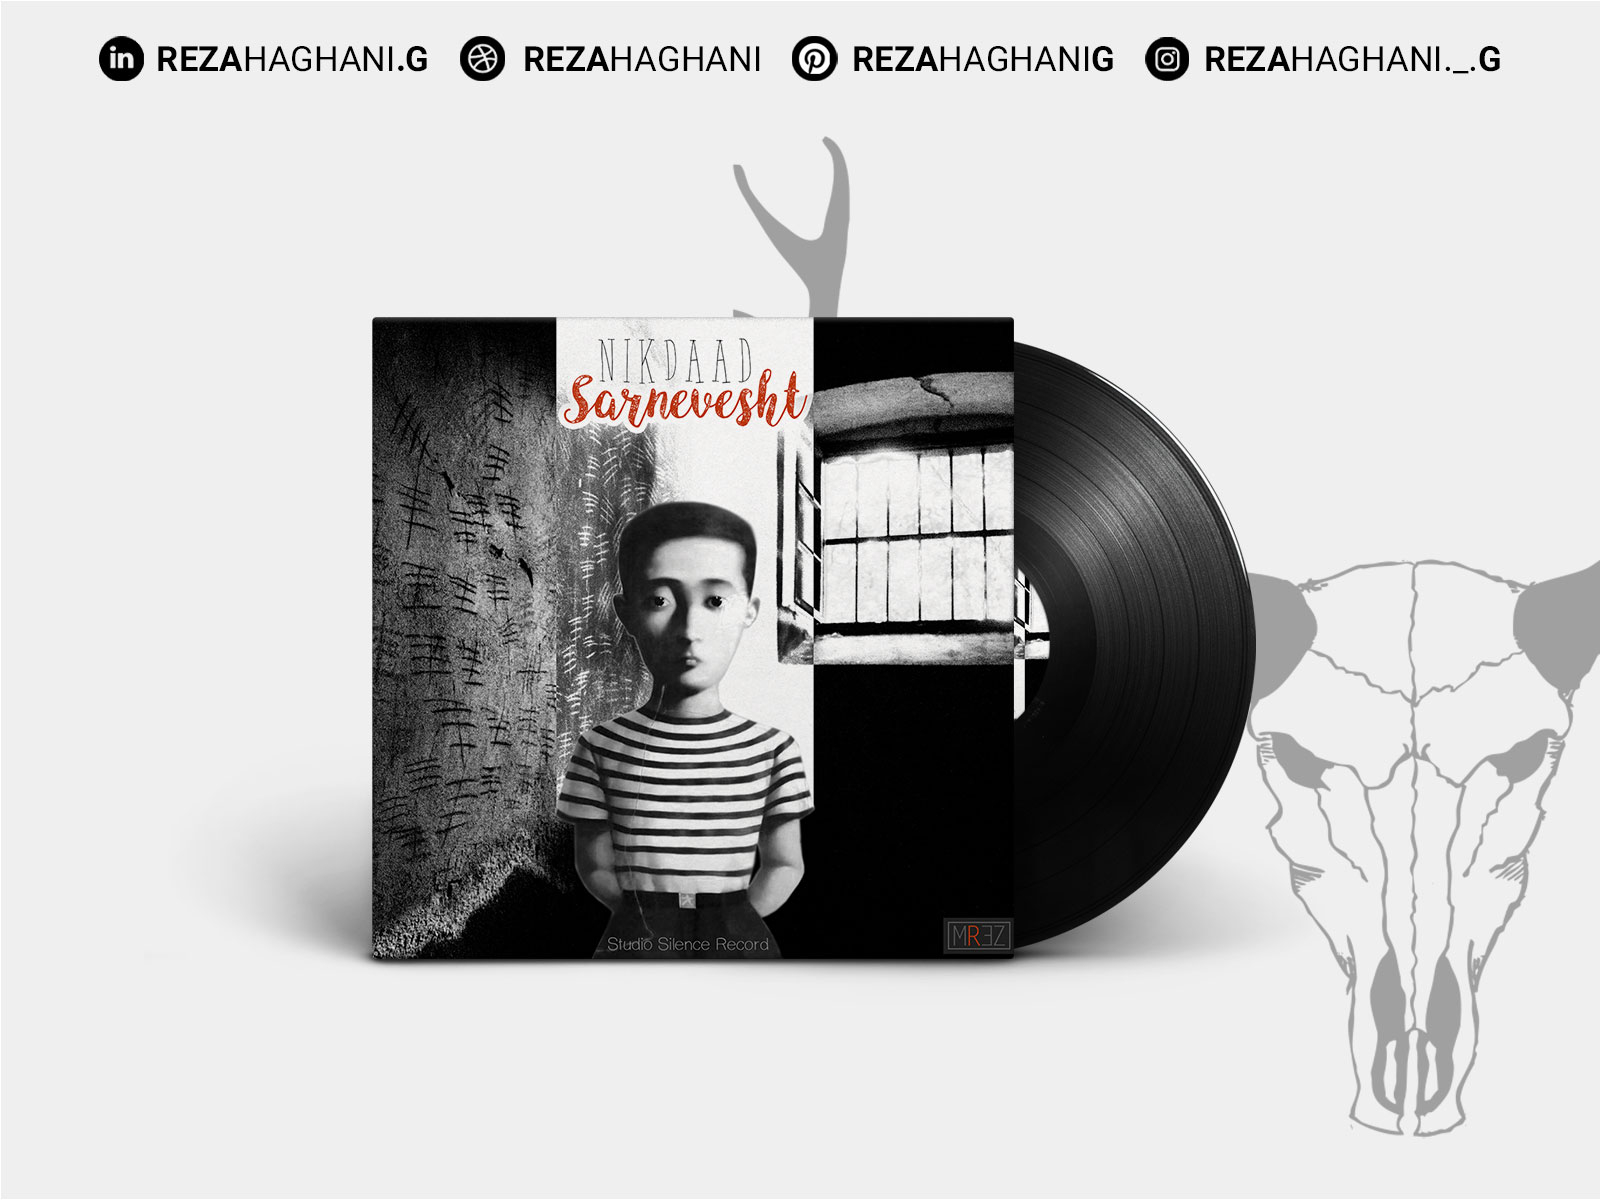 Sarnevesht Music Cover | کاور آهنگ سرنوشت by Reza Haghani G on Dribbble